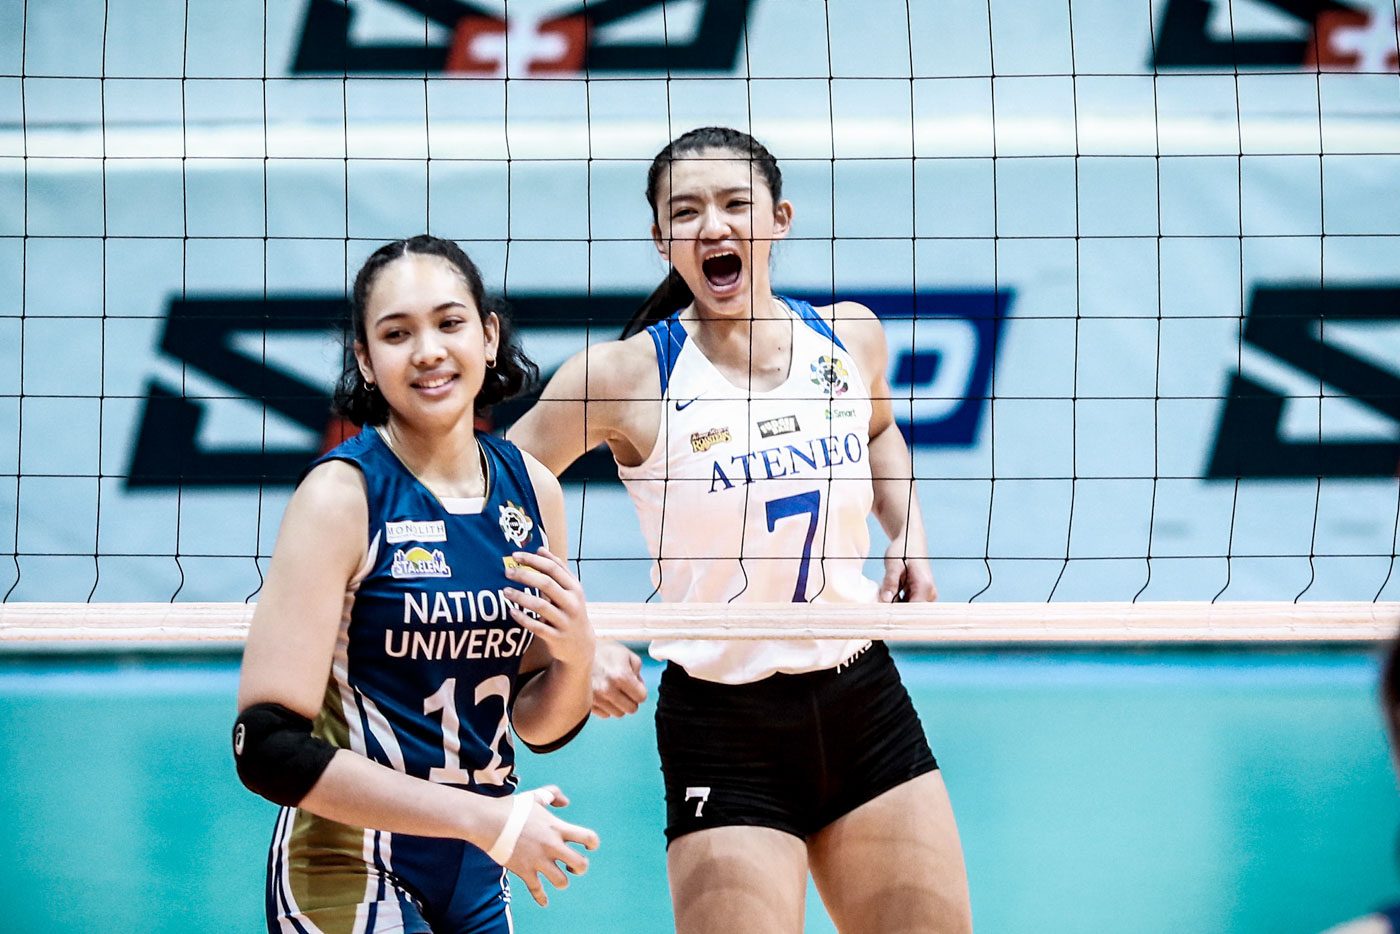 Ateneo stays solo on top after 1st round